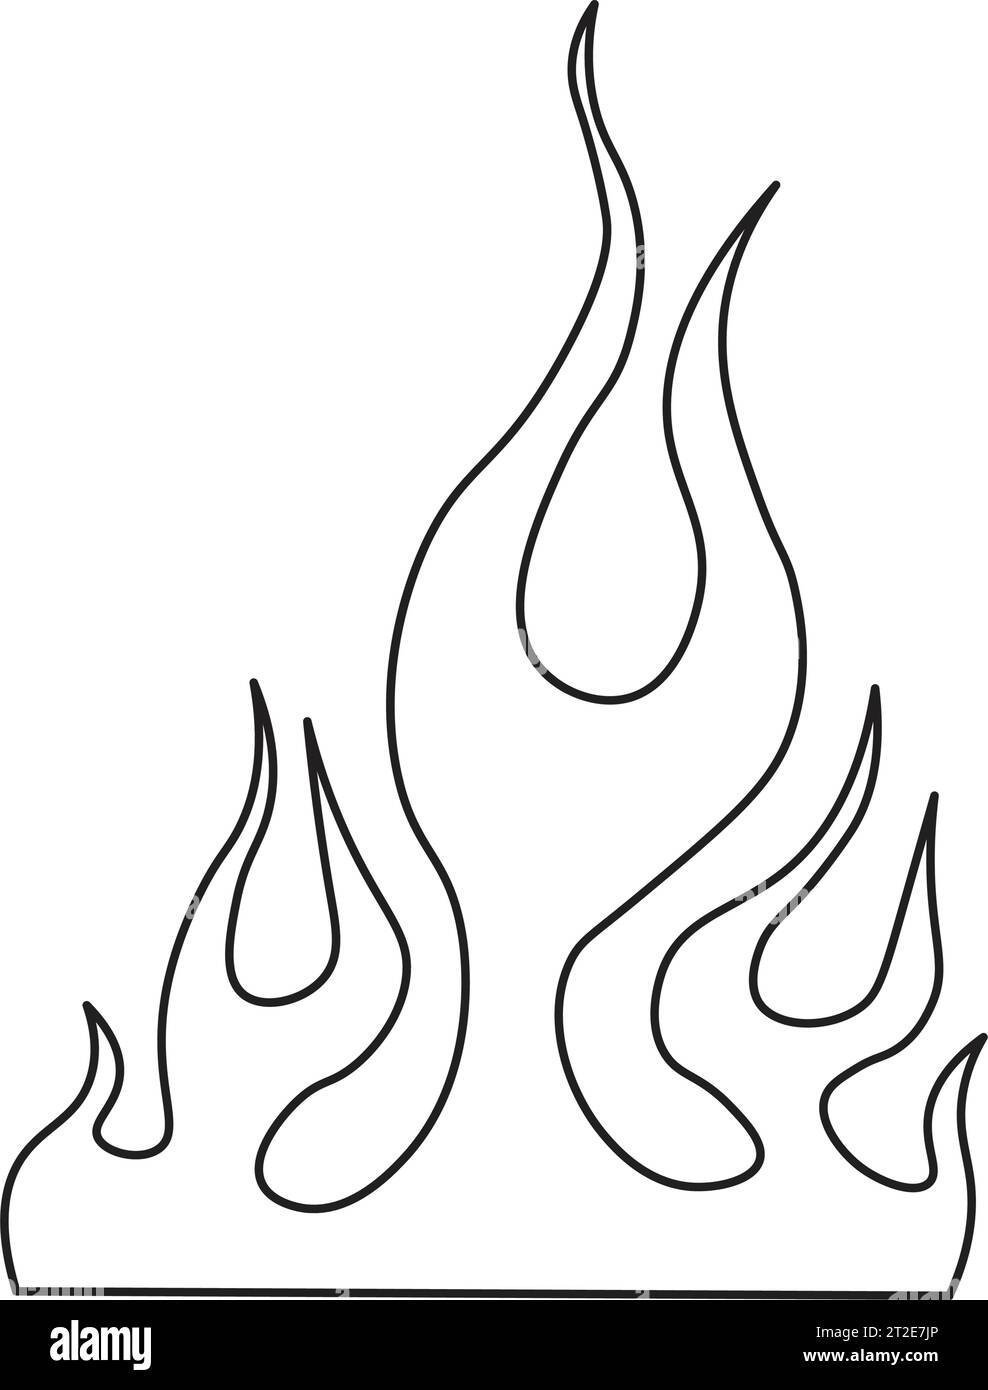 Flame Tattoo Tribal Vector Design Fire Stock Vector (Royalty Free)  436778995 | Shutterstock